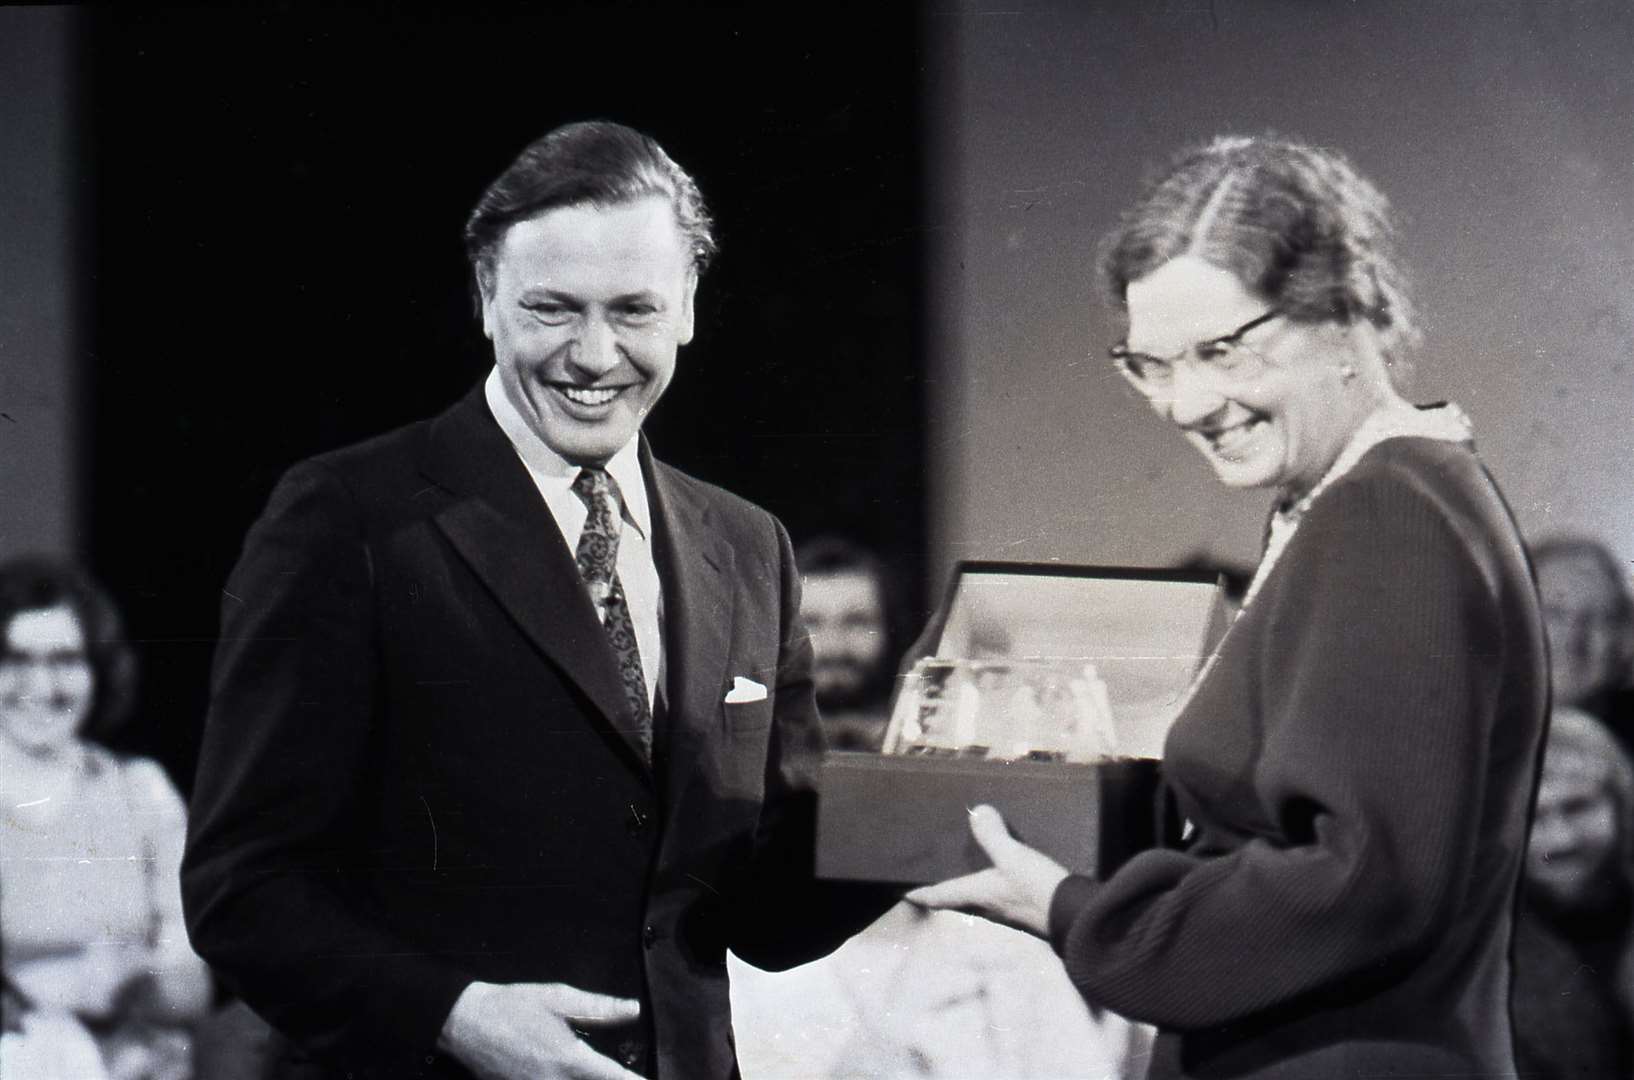 Nancy Wilkinson, the first champion, receiving the trophy from David Attenborough who at that time was director of programmes at the BBC. Picture: BBC